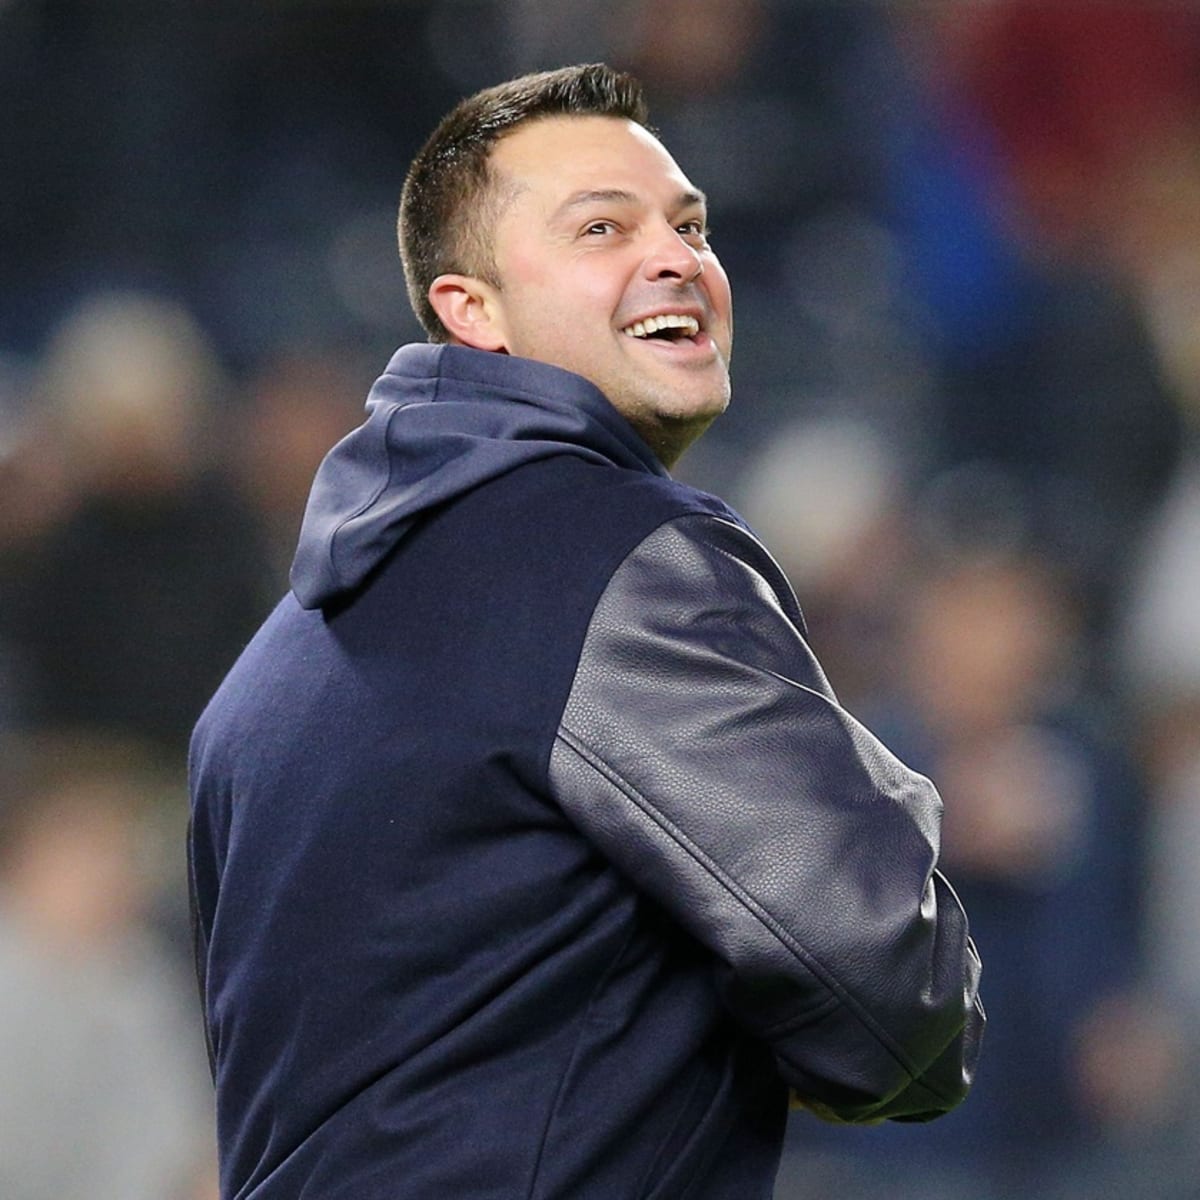 Nick Swisher is set to have a big year for the Indians in 2014